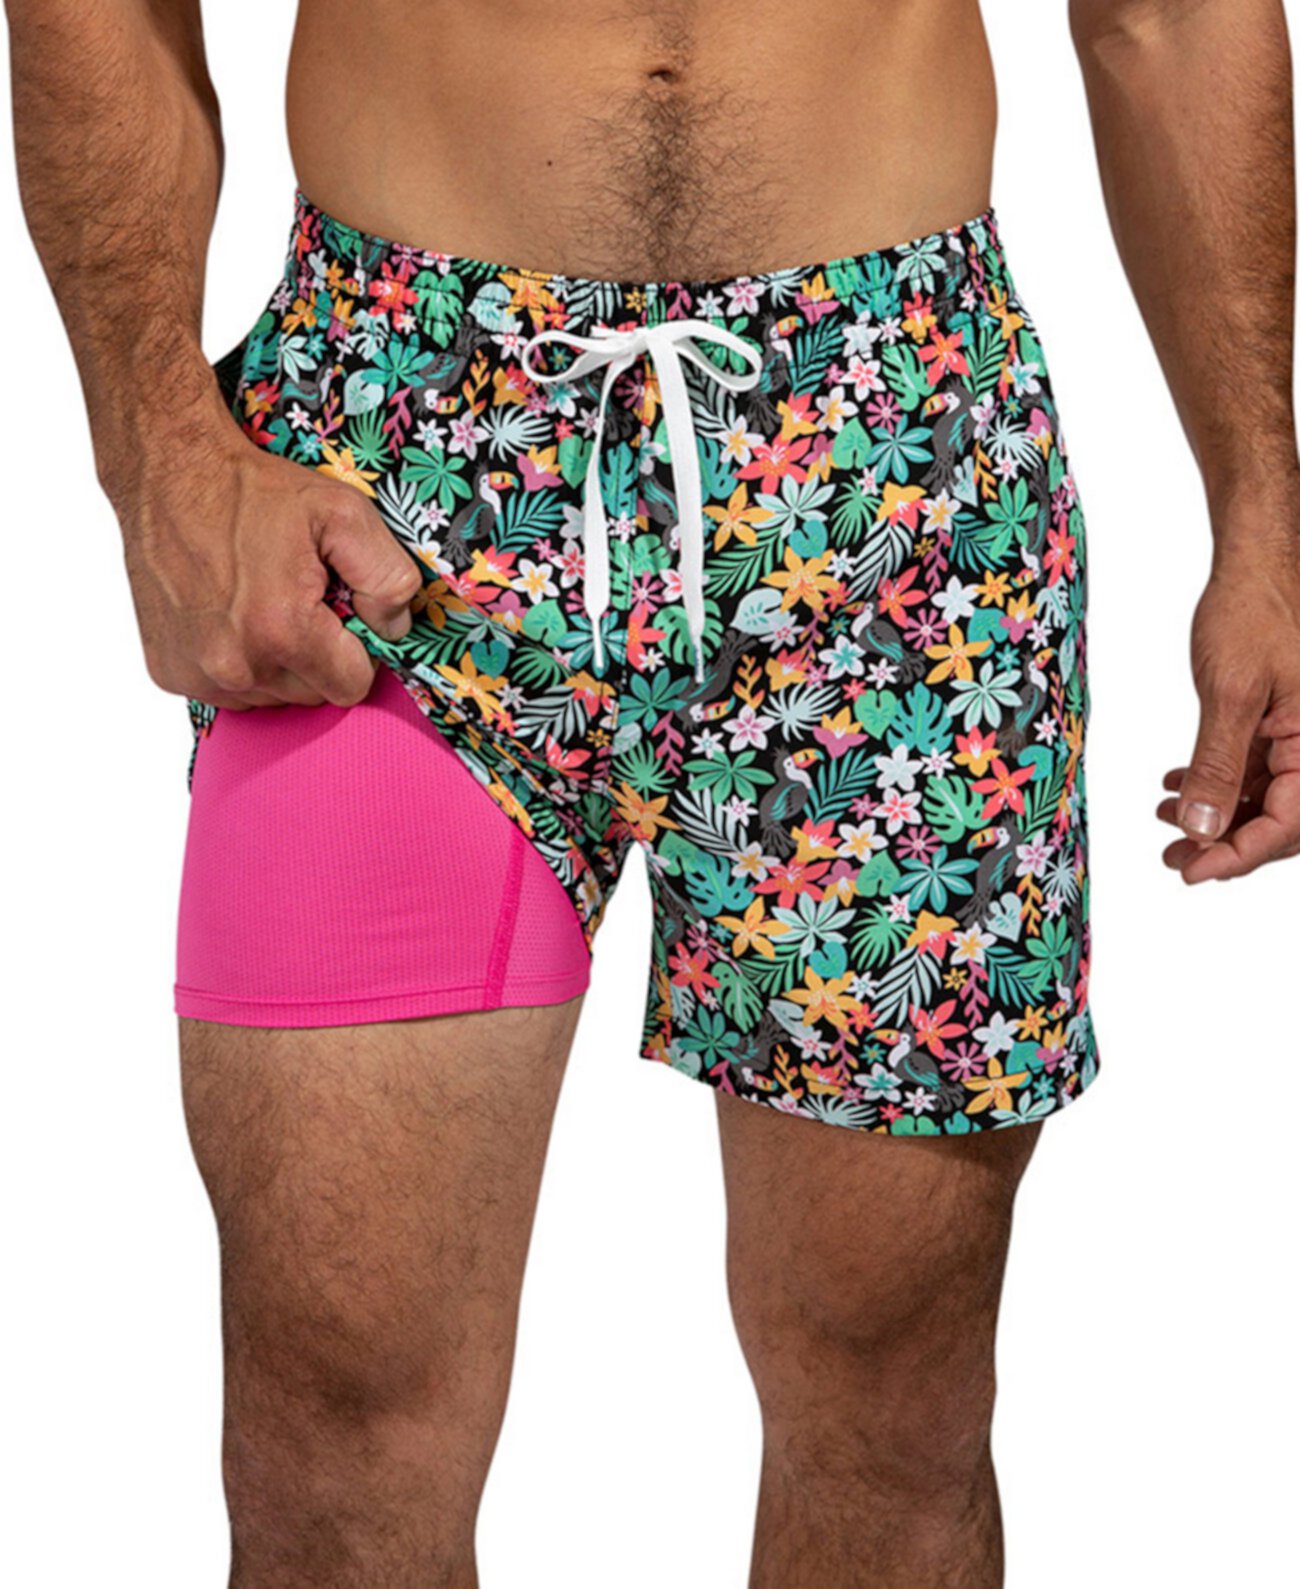 Men's The Bloomerangs Quick-Dry 5-1/2" Swim Trunks with Boxer-Brief Liner CHUBBIES